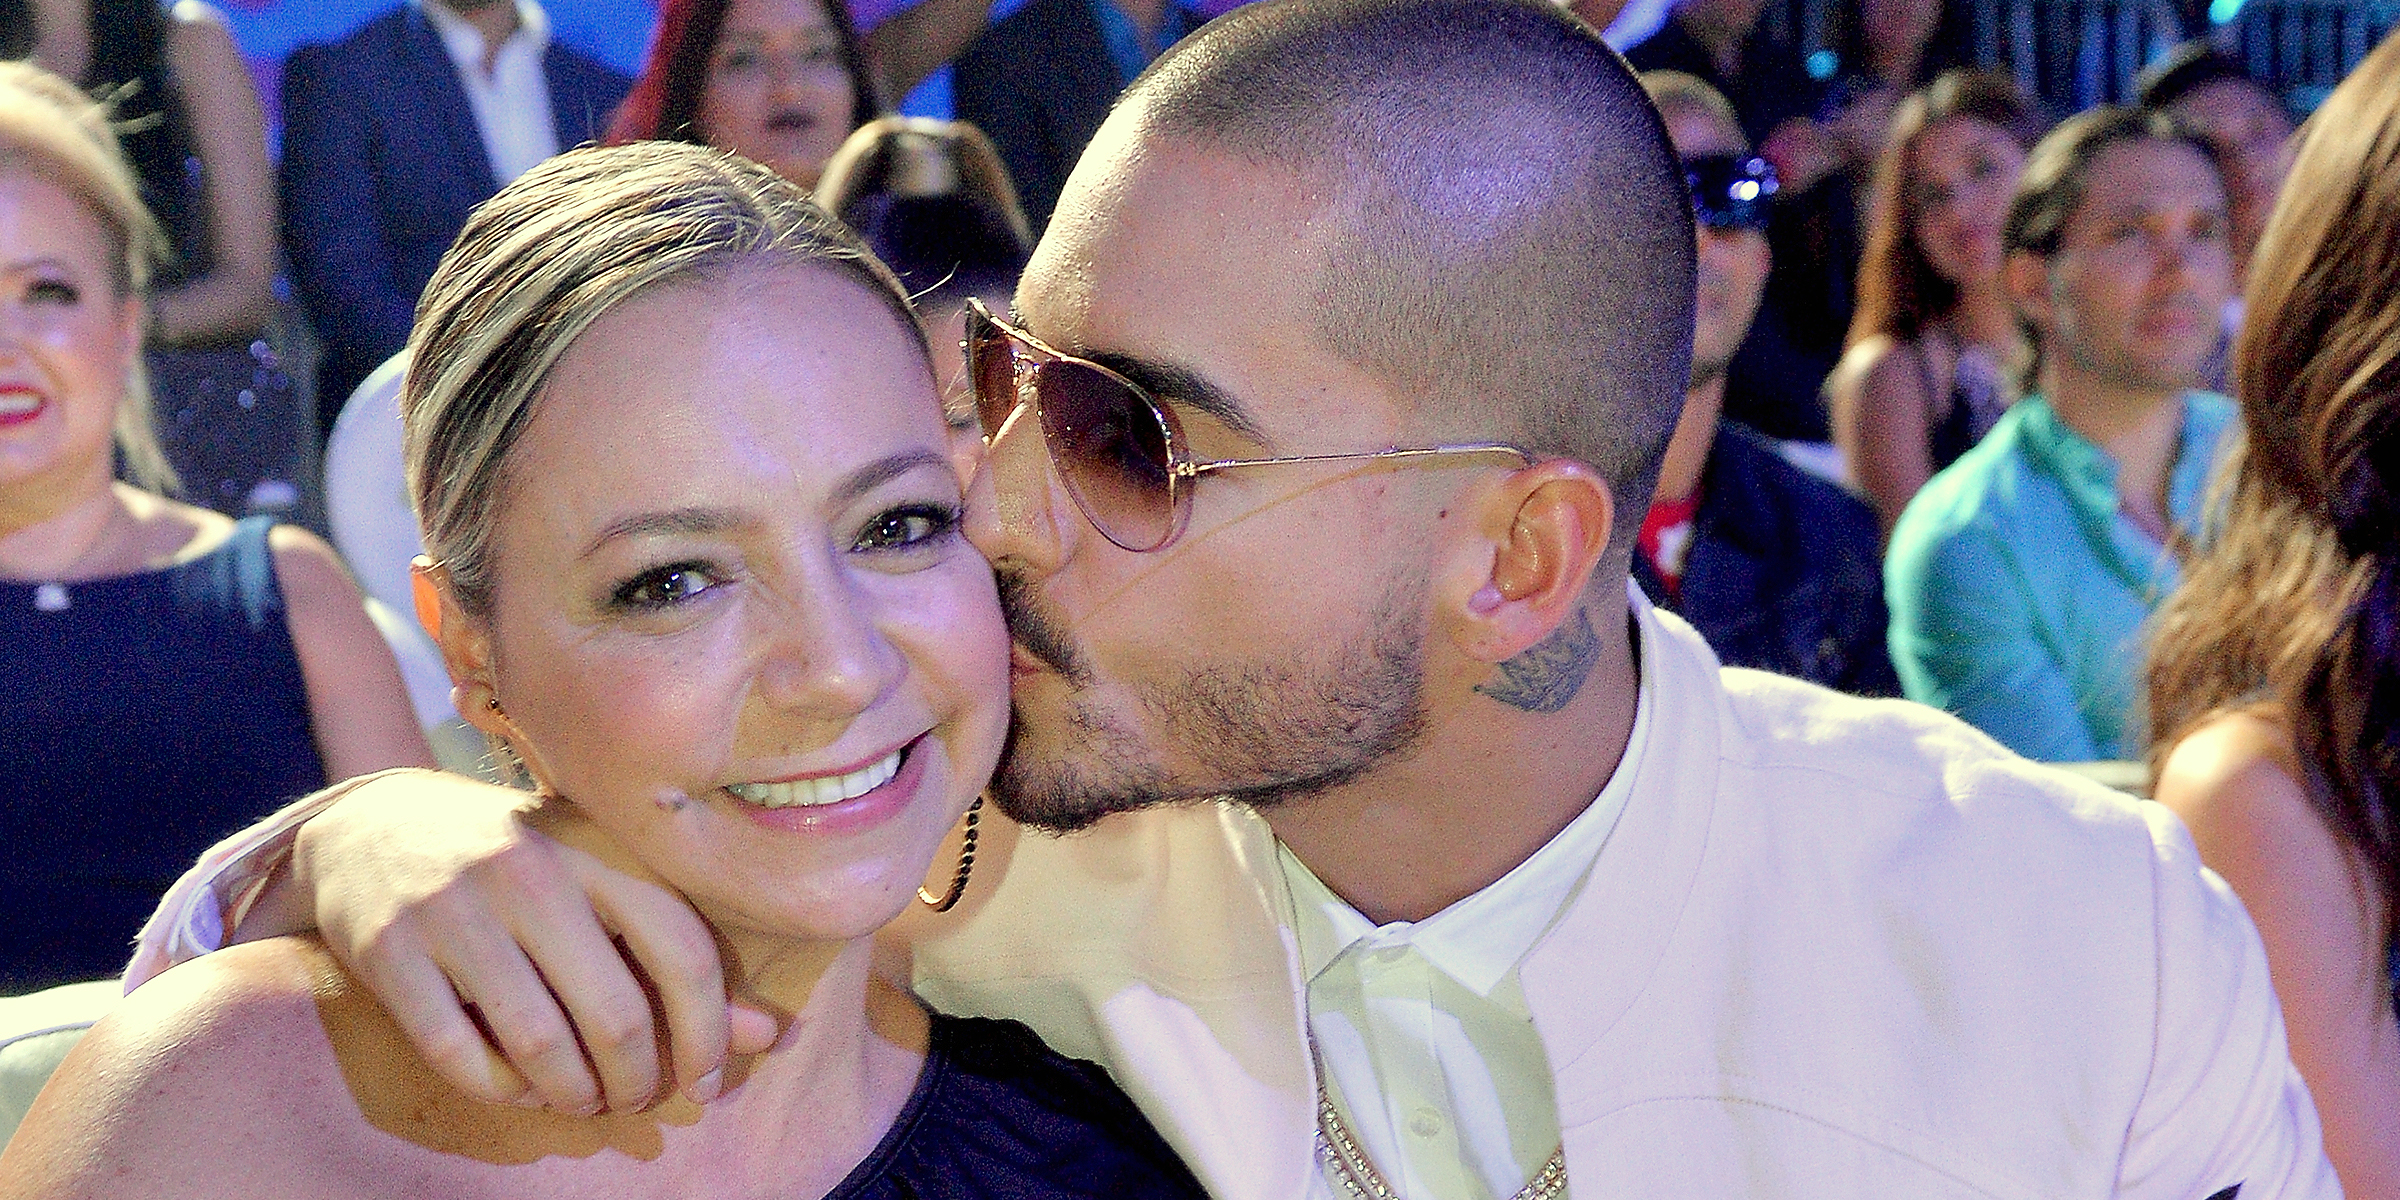 Marlli Arias and Maluma | Source: Getty Images